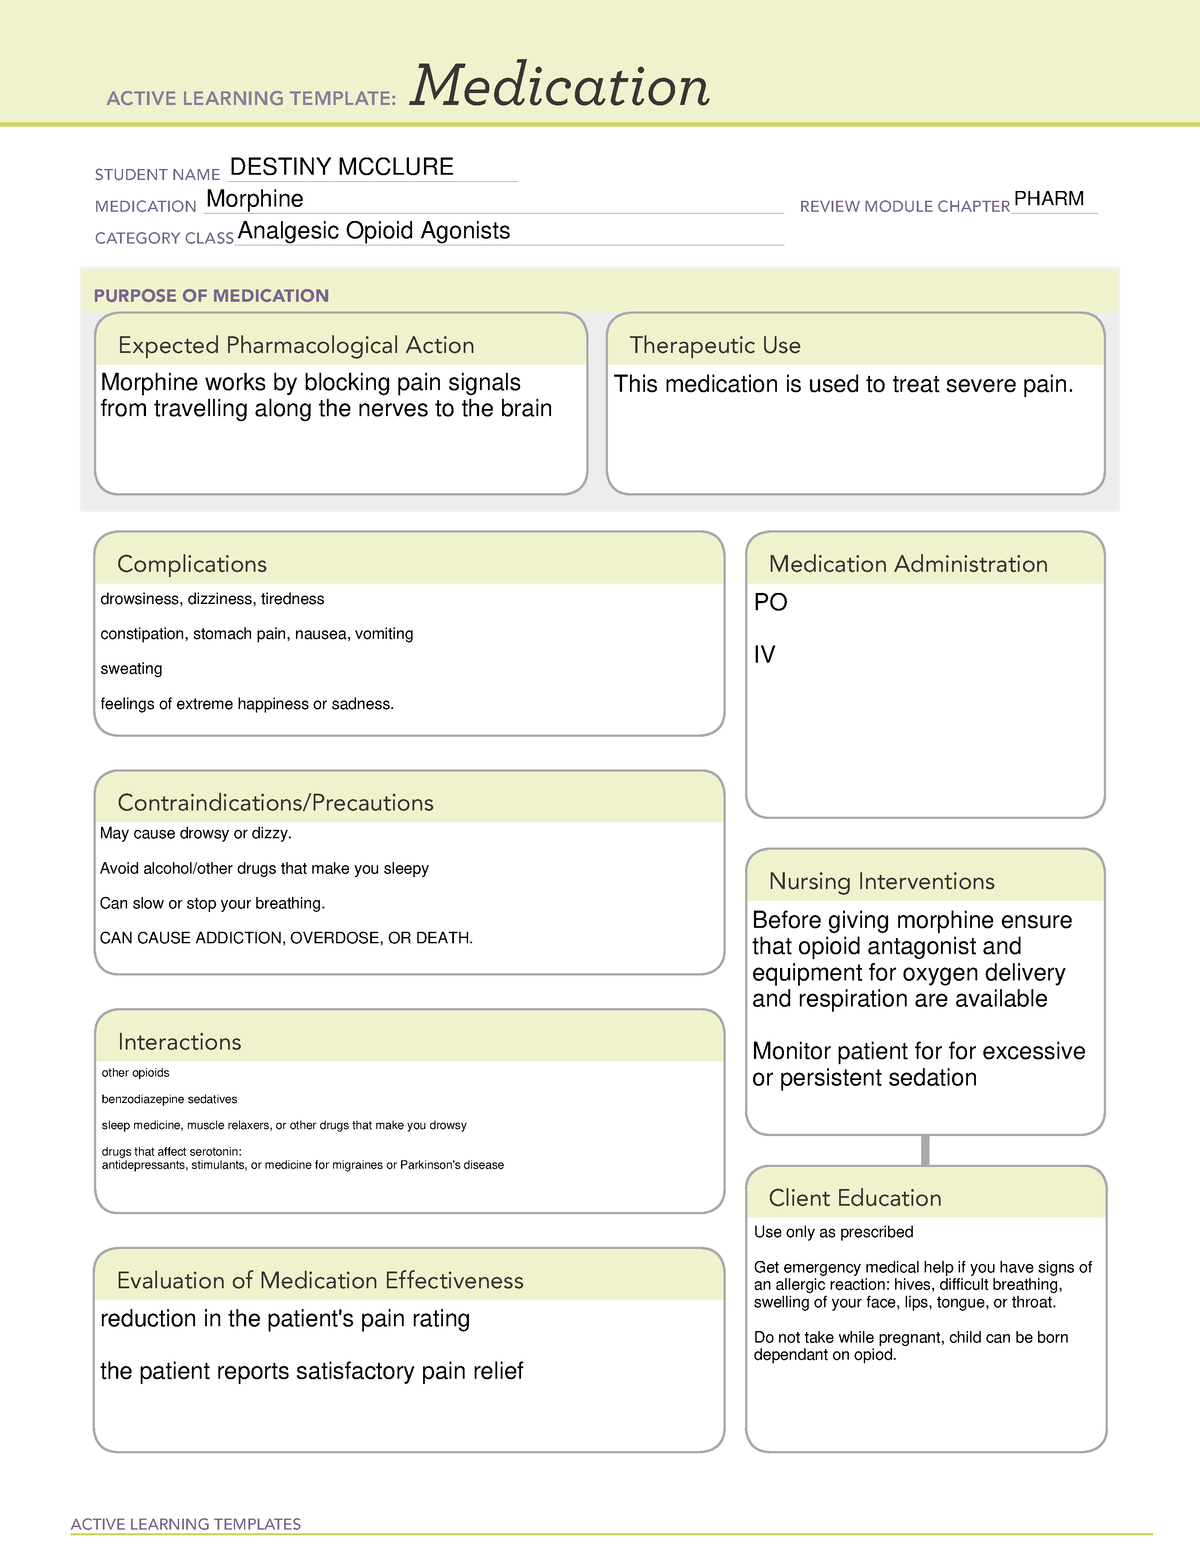 Medication Morphine D Mcclure ACTIVE LEARNING TEMPLATES Medication